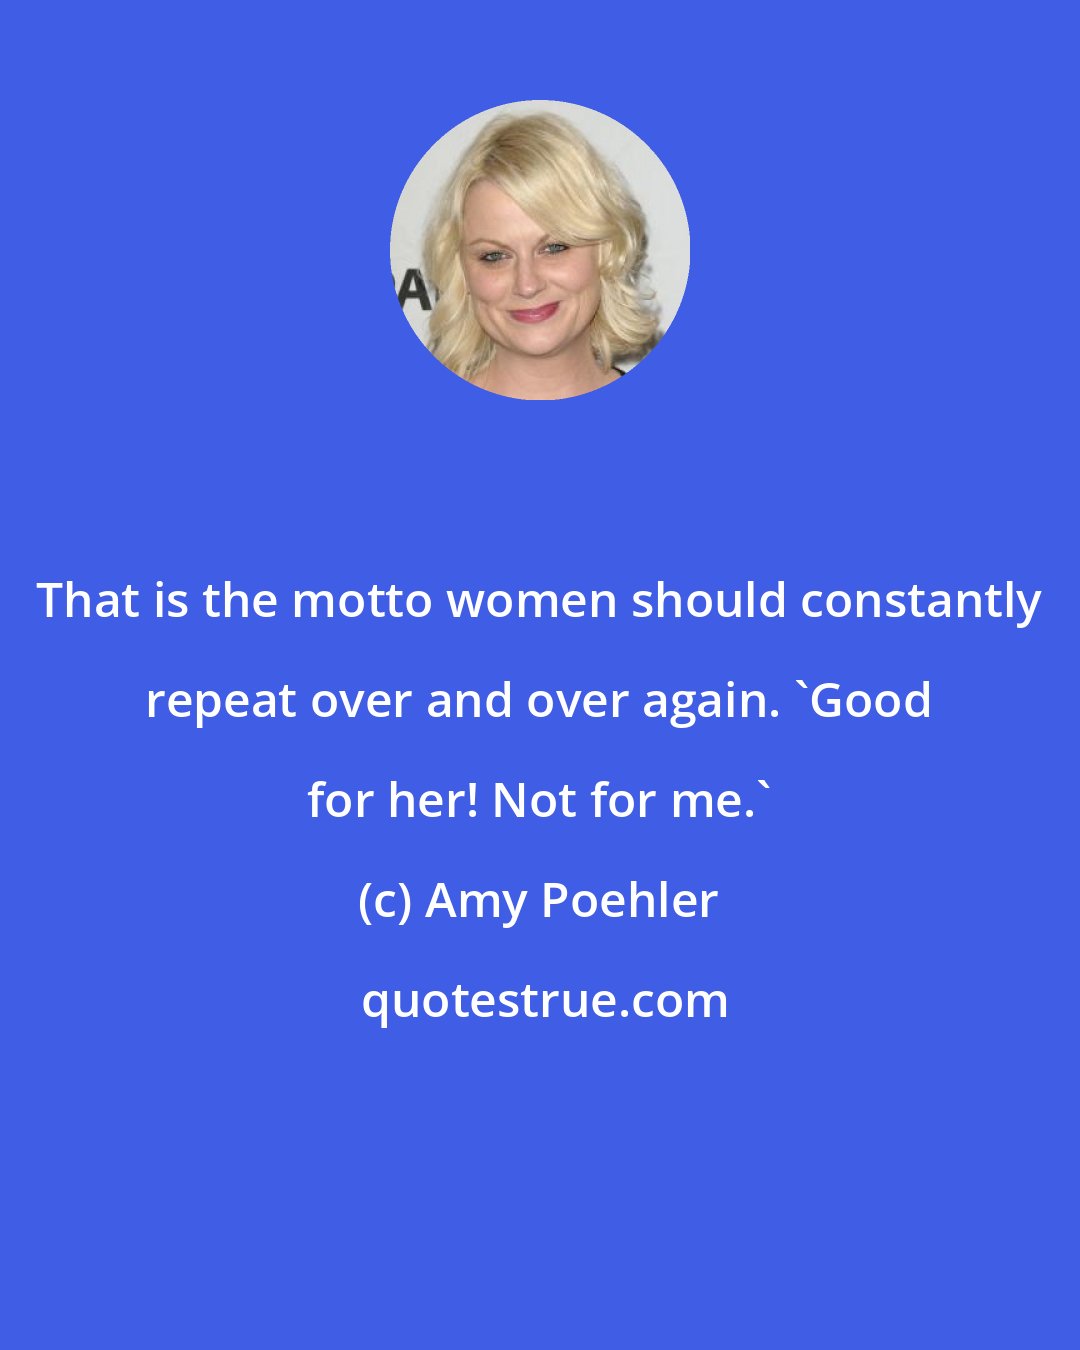 Amy Poehler: That is the motto women should constantly repeat over and over again. 'Good for her! Not for me.'